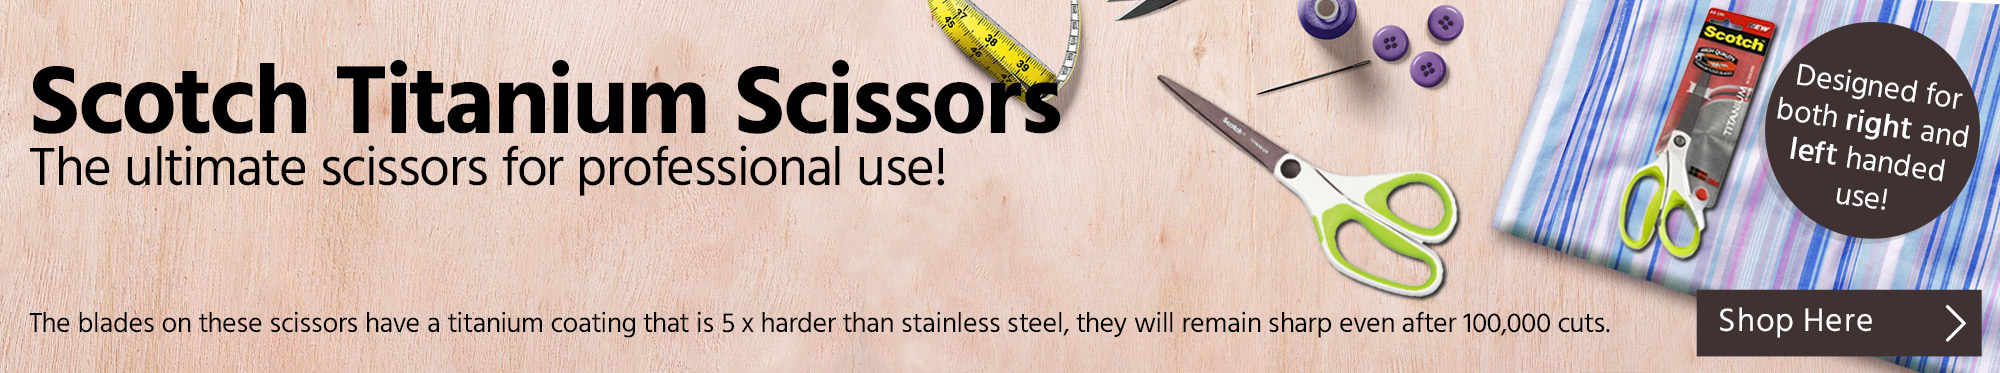 Scotch - The Ultimate Scissors for Professional Use